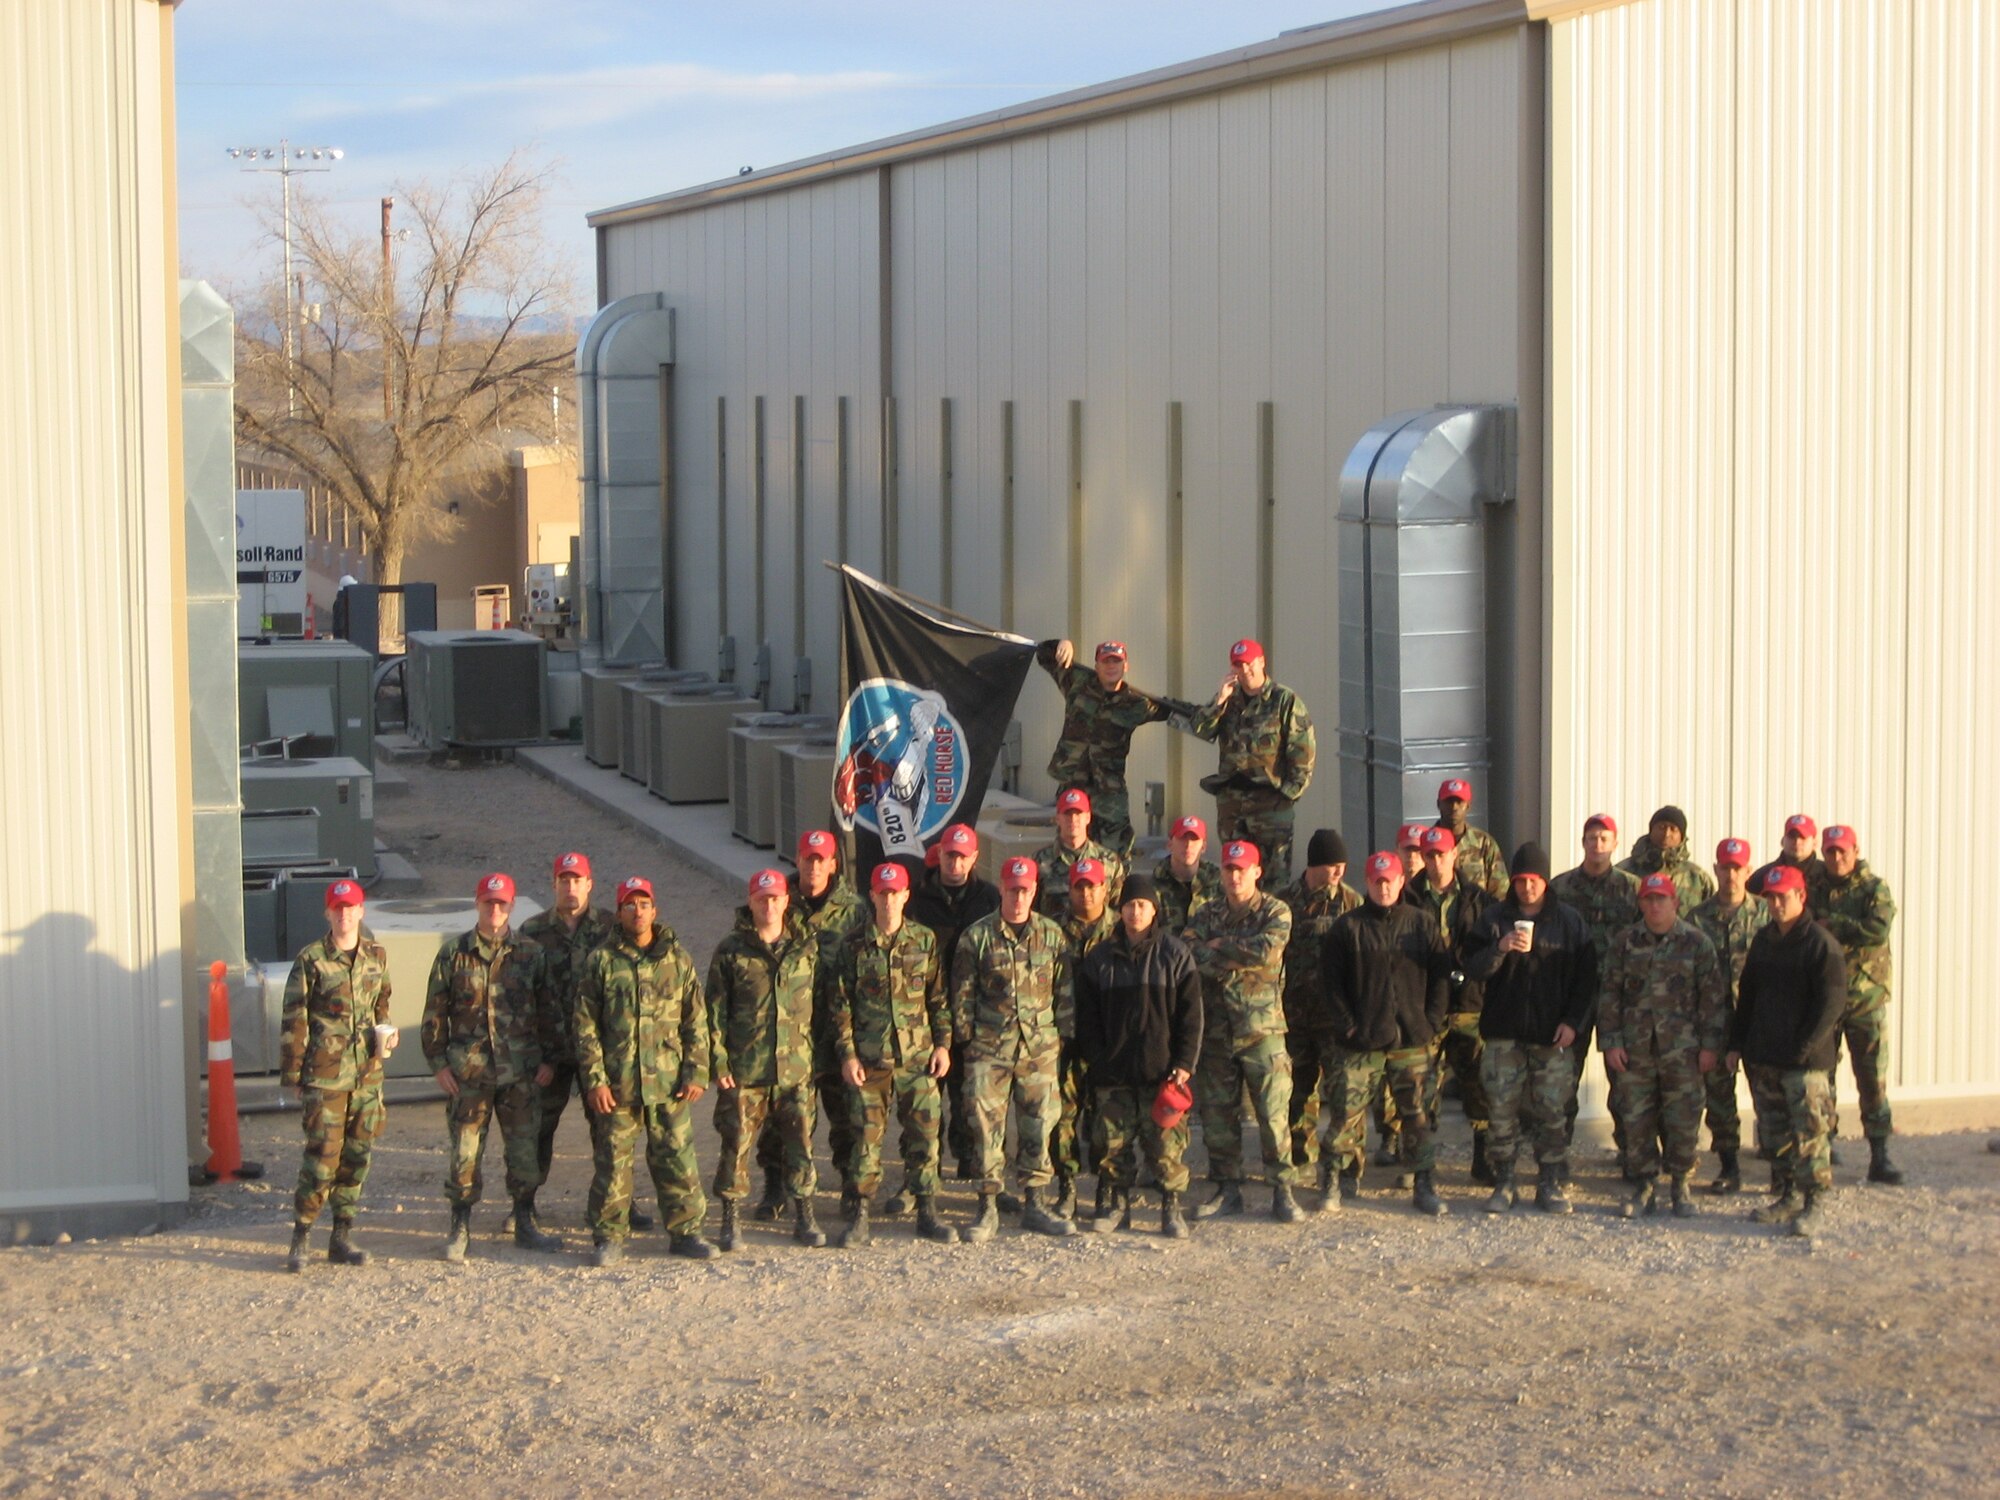  The multi-crafted team of REDHORSE Airmen pose for a group picture outside their recently constructed facilities for the 42nd Attack Squadron and 11th Reconnaissance Squadron at Creech. U.S. Air Force photo by Capt. Steve Thomas / 820th REDHORSE